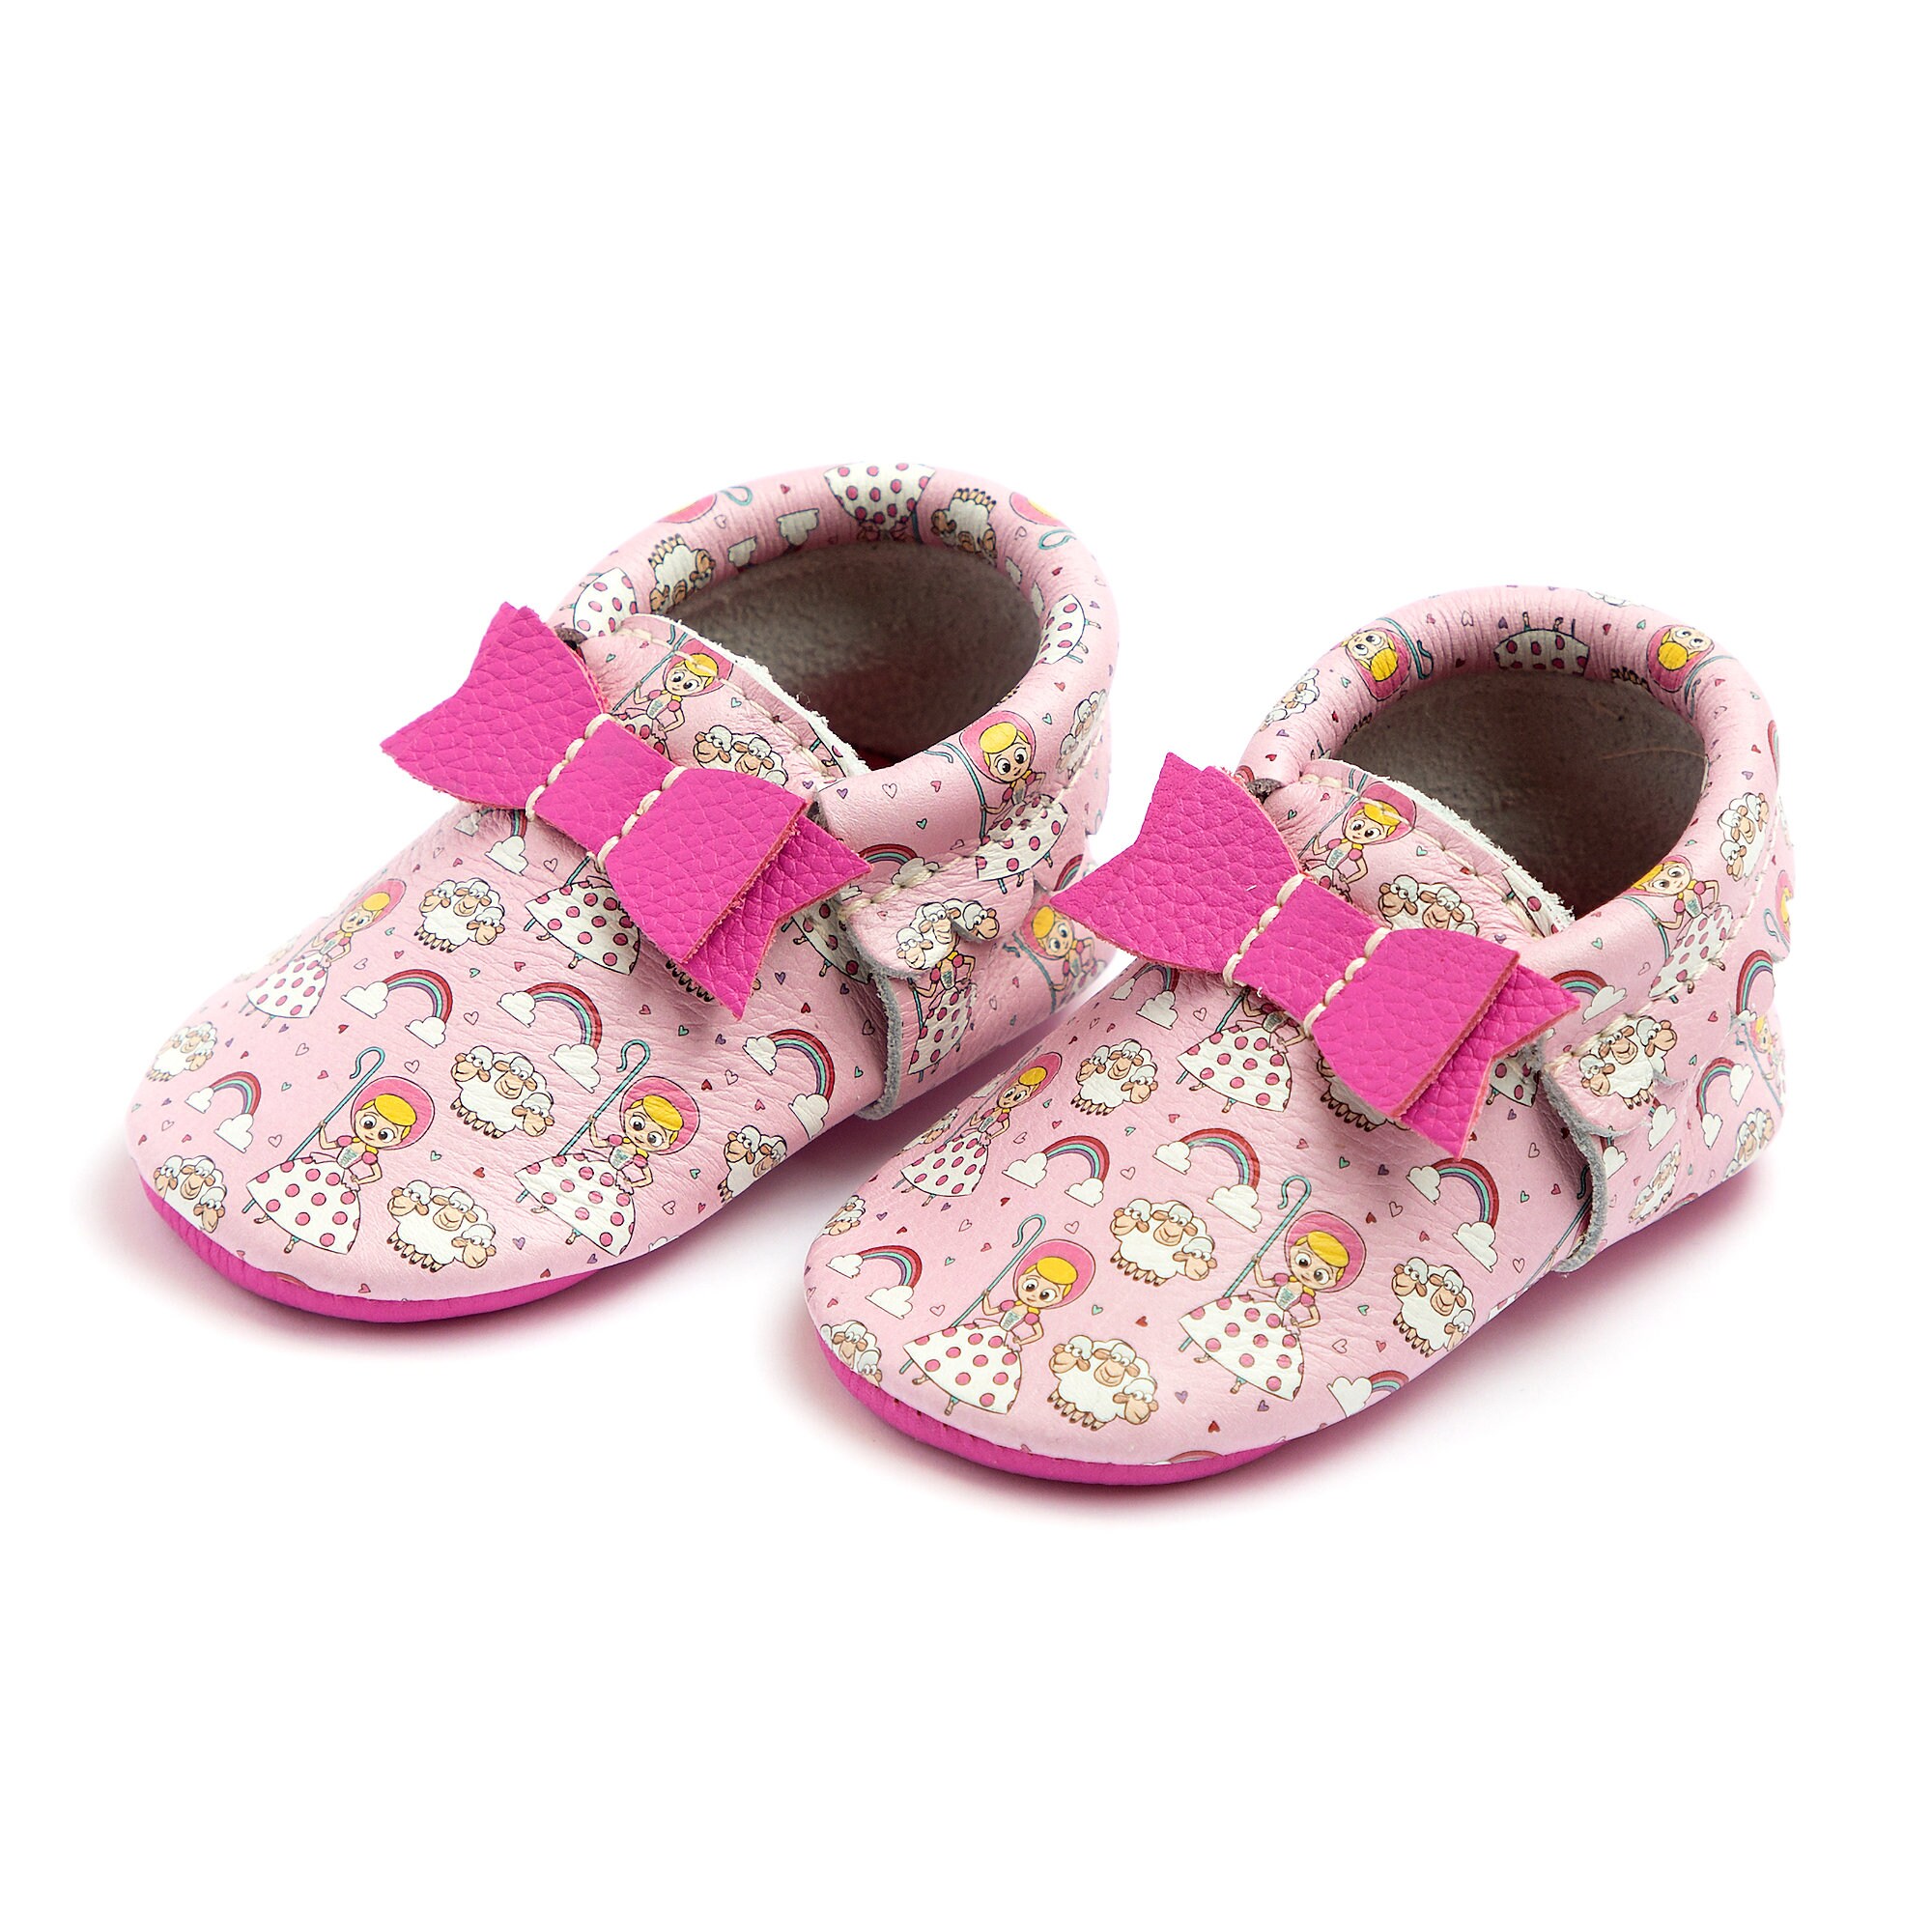 Bo Peep Moccasins for Baby by Freshly Picked